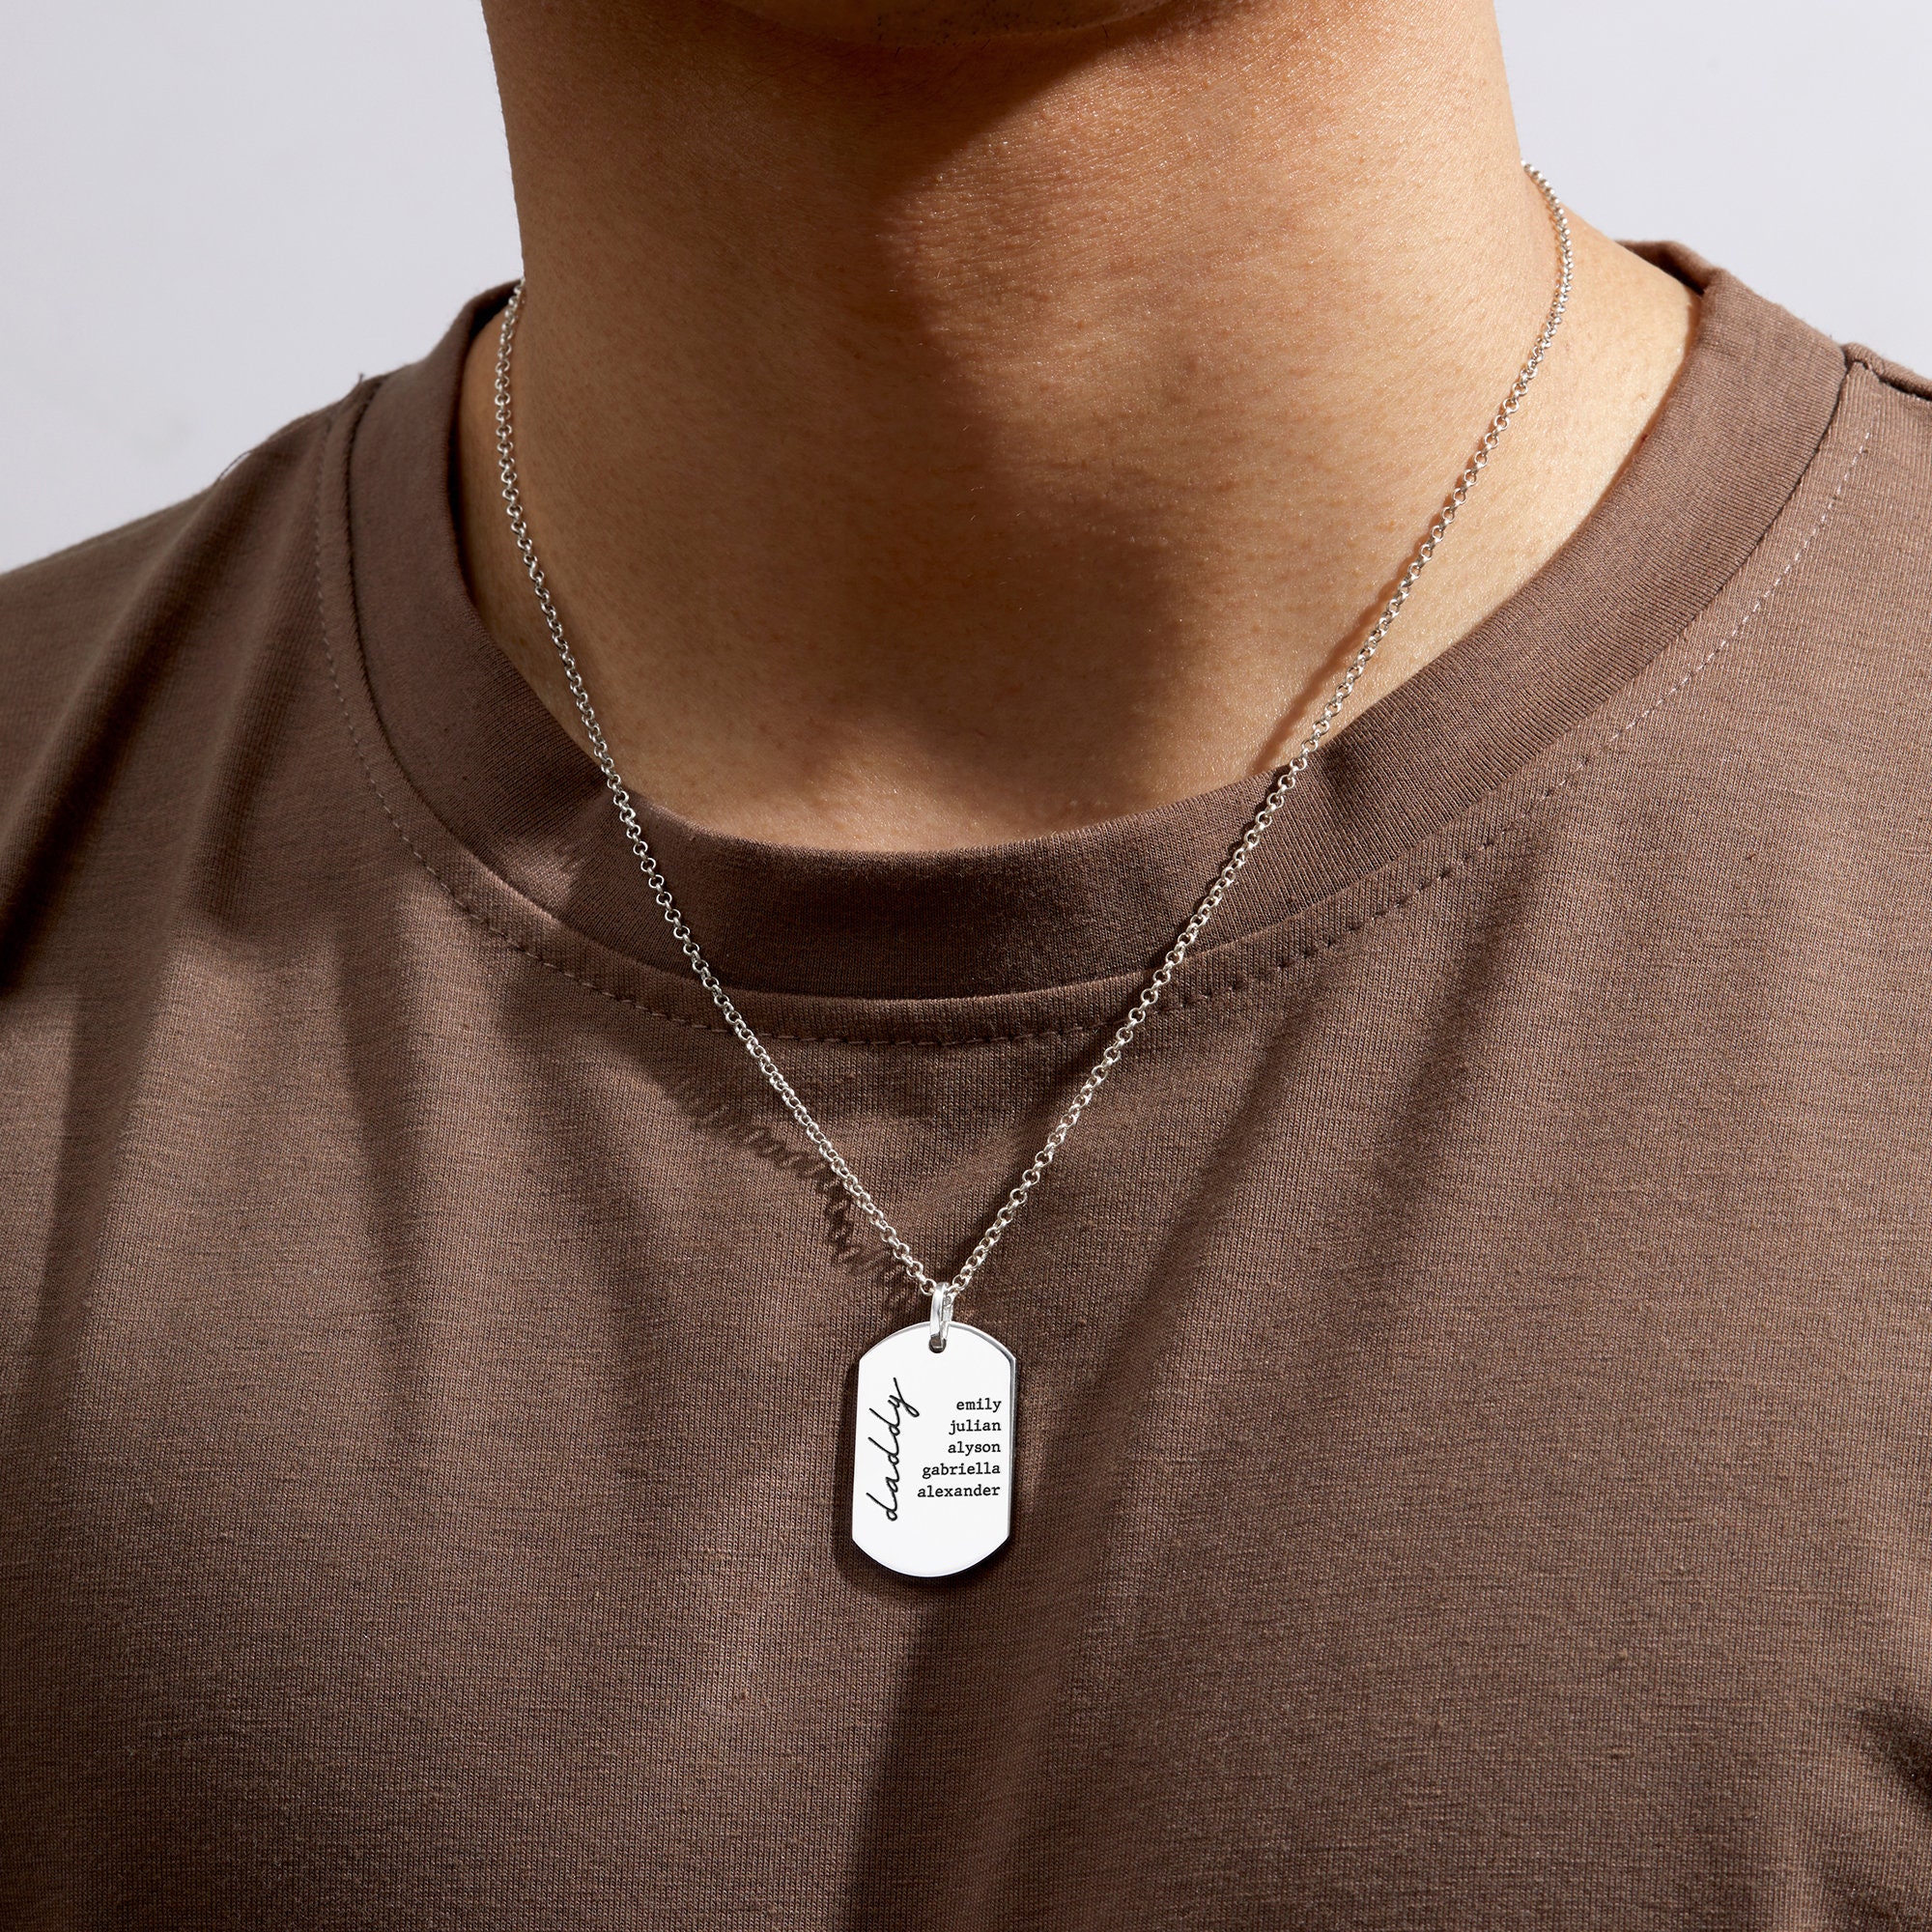 Personalized Dog Tag Necklace Custom Necklace for Men Kid Name Necklace  Family Necklace Fathers Day Gift Men Gifts 